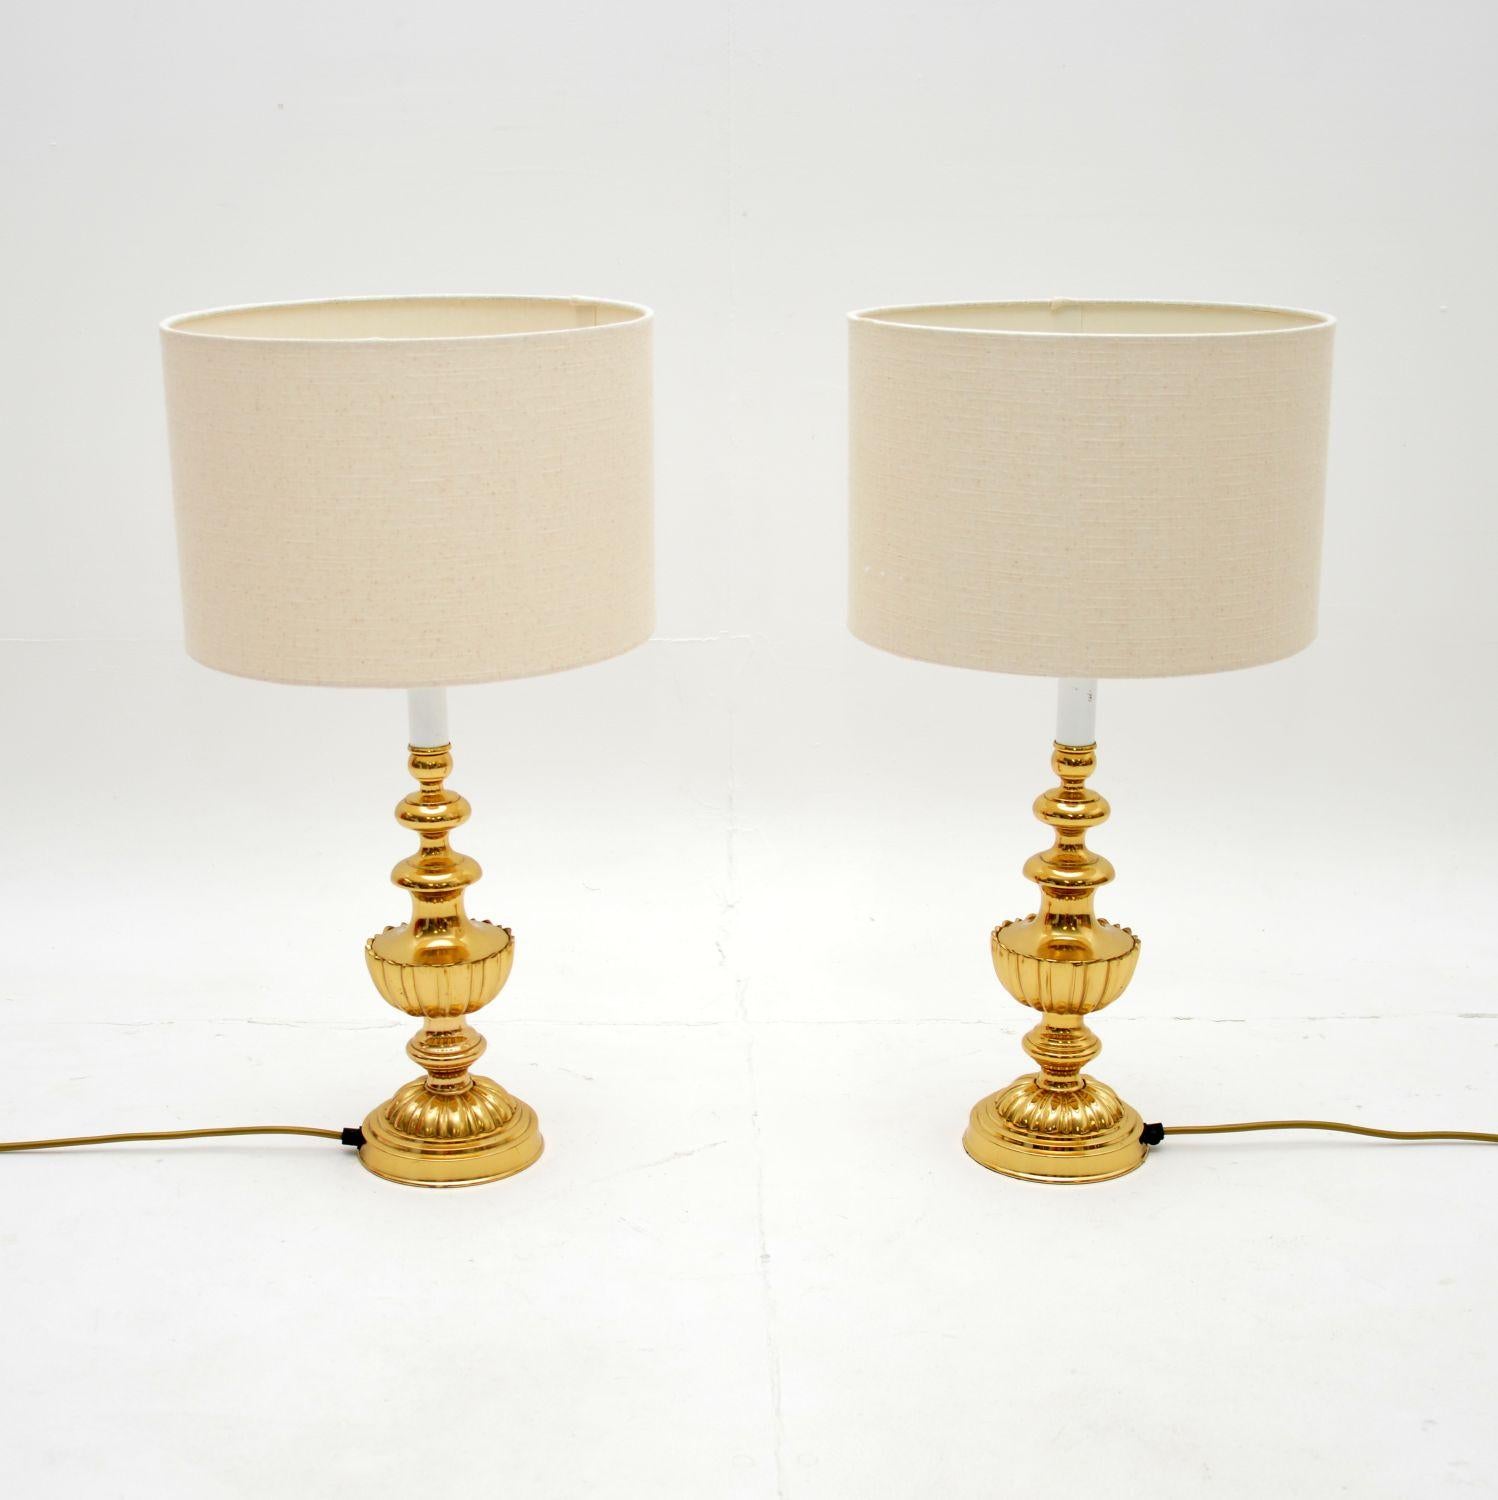 A fabulous and stylish pair of vintage brass table lamps. They were made in England, they date from around the 1970’s.

The quality is outstanding, they are really well made and are a lovely size. They are designed in the manner of urn shaped candle